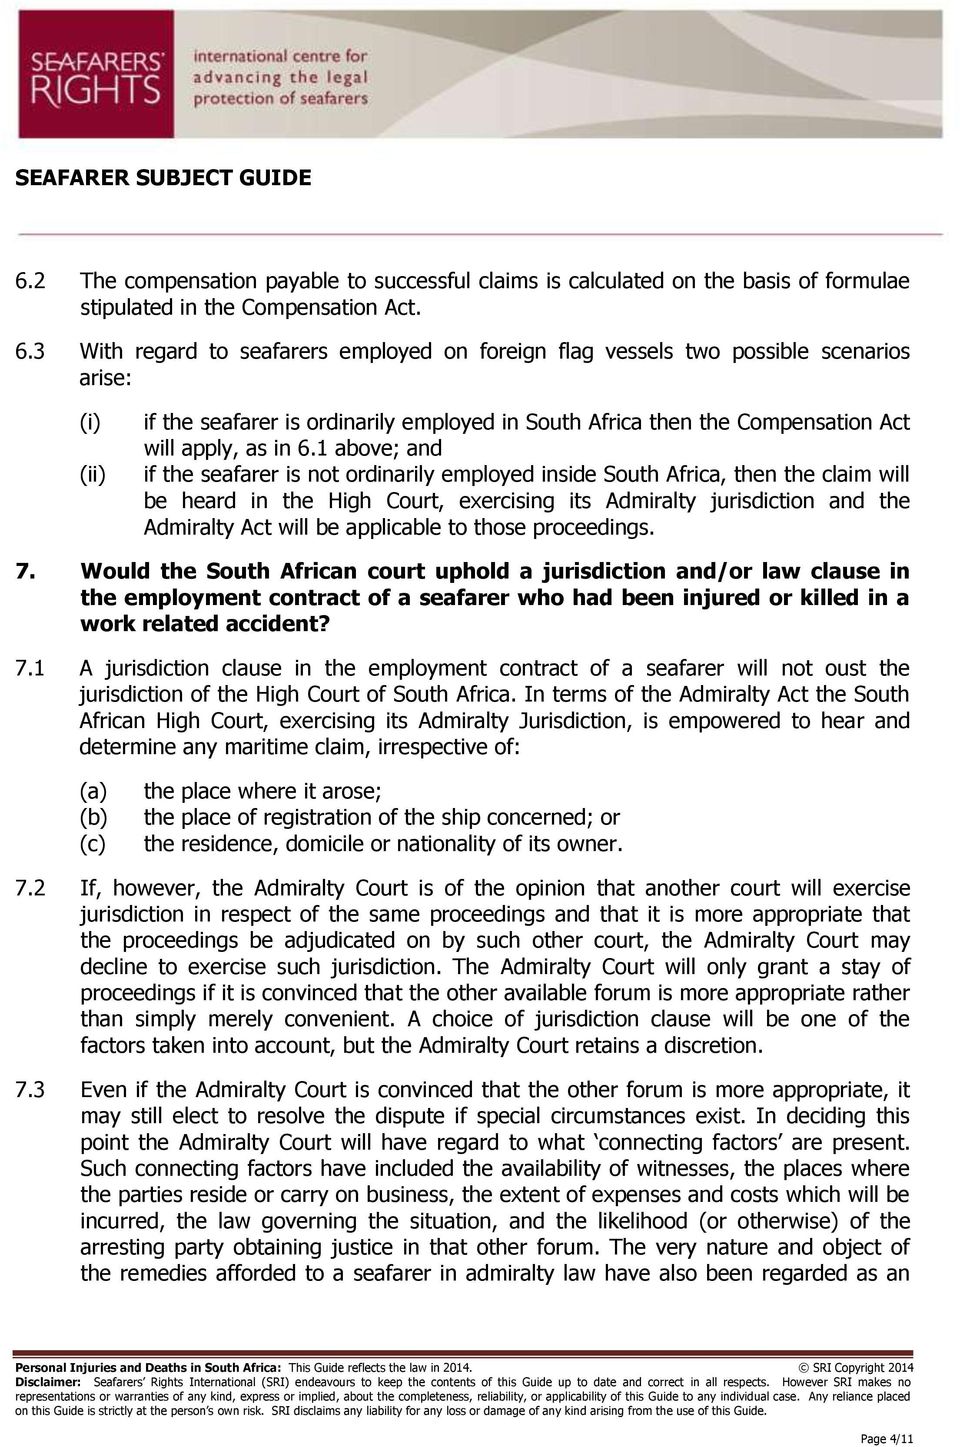 1 above; and if the seafarer is not ordinarily employed inside South Africa, then the claim will be heard in the High Court, exercising its Admiralty jurisdiction and the Admiralty Act will be